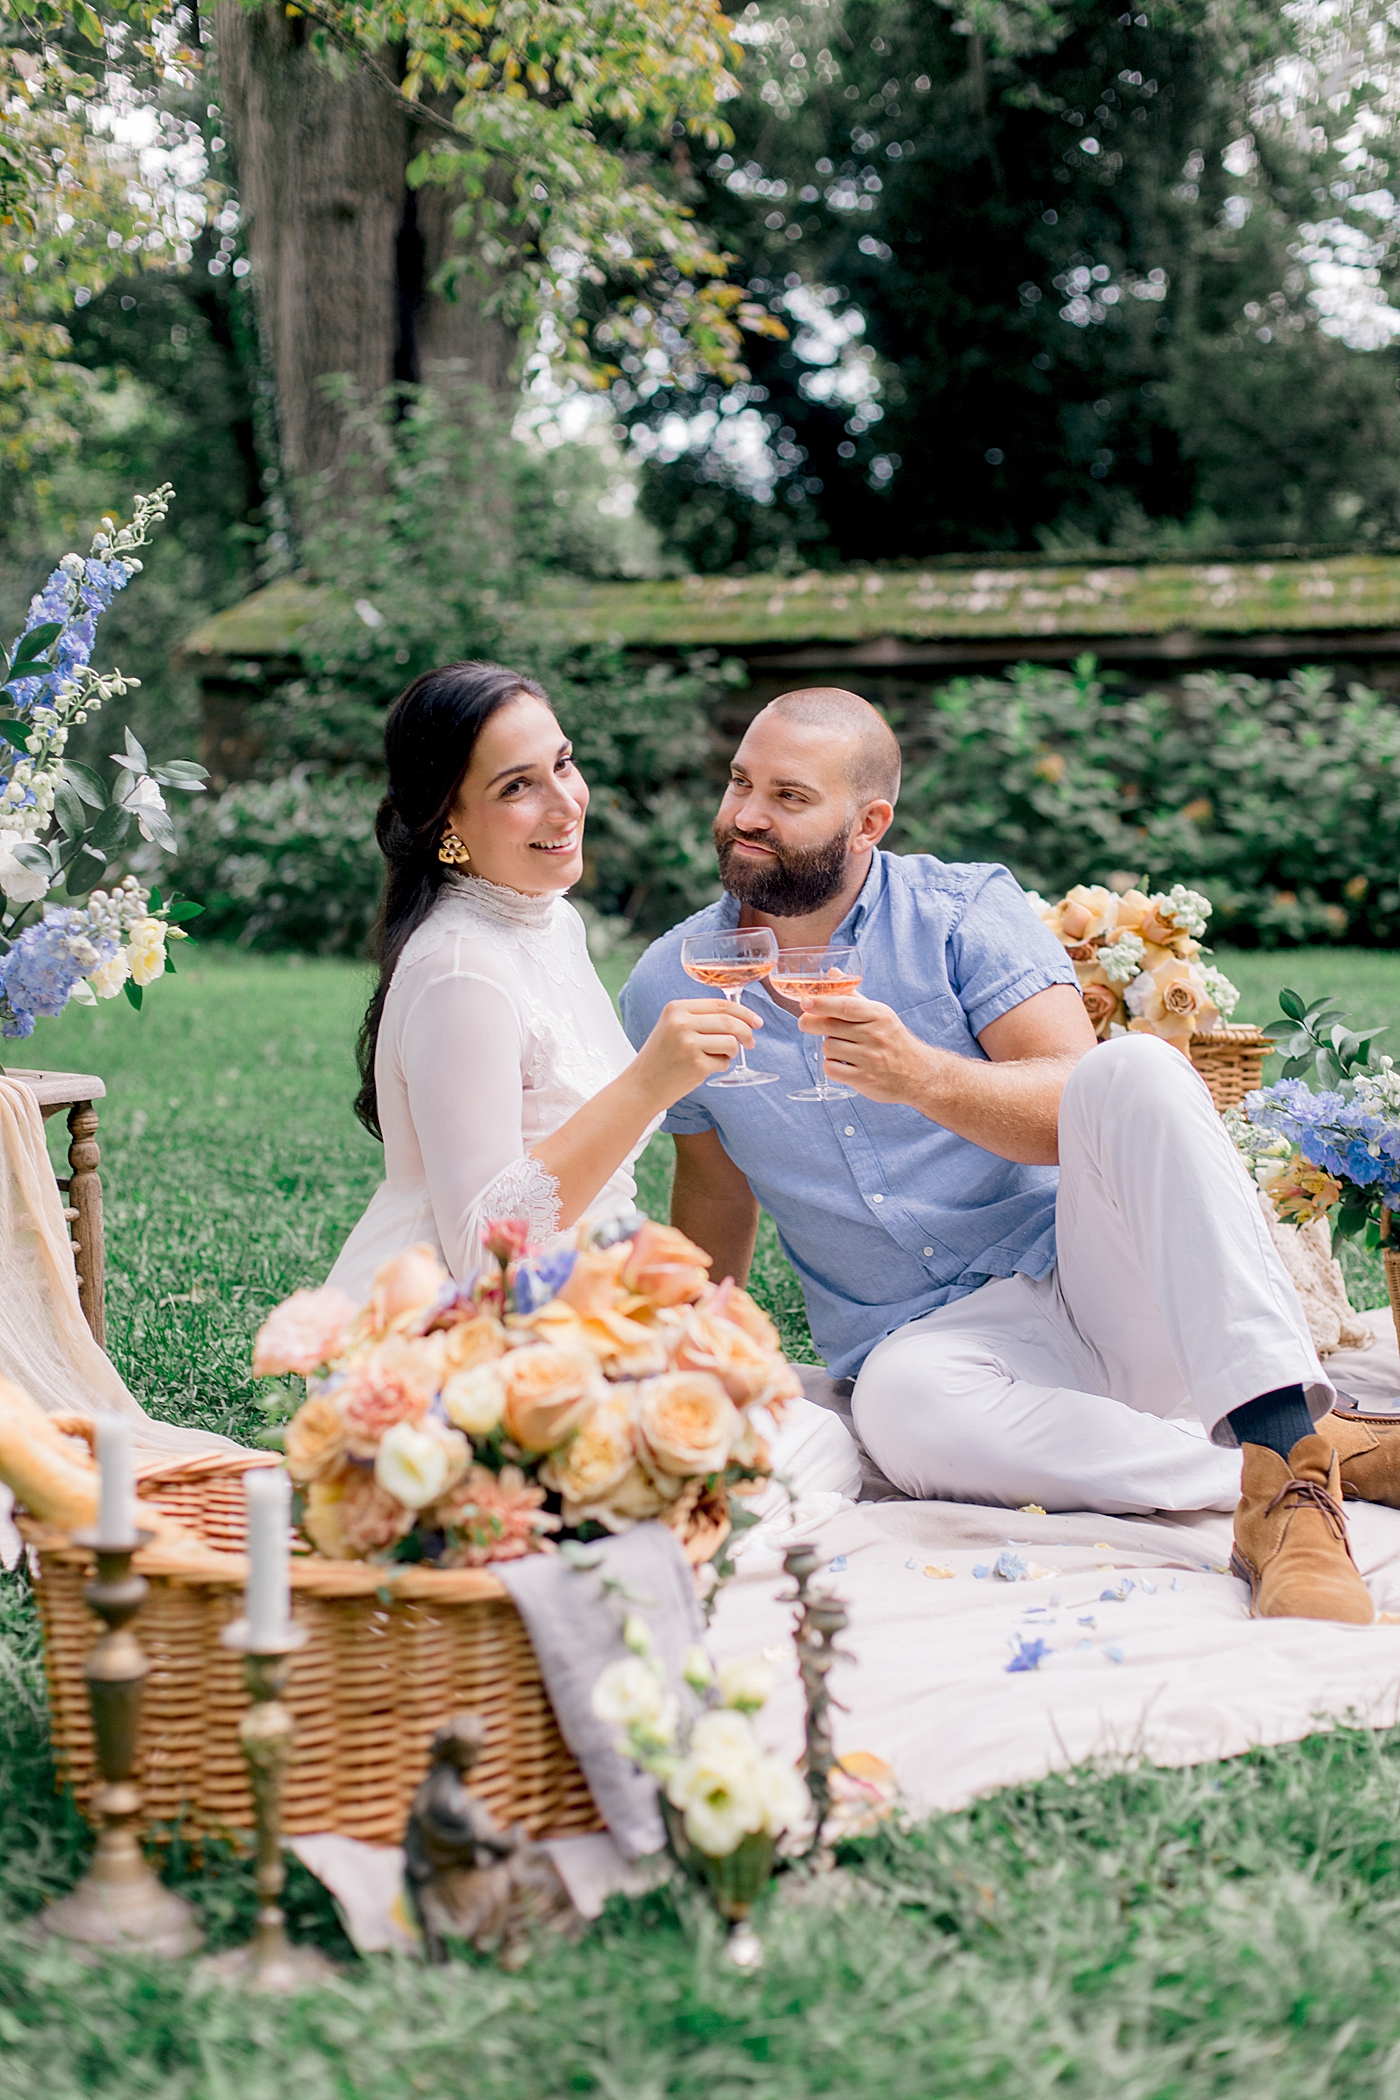 Bride and groom having a picnic toasting rose | Styling and Planning Engagement Sessions with Hope Helmuth Photography